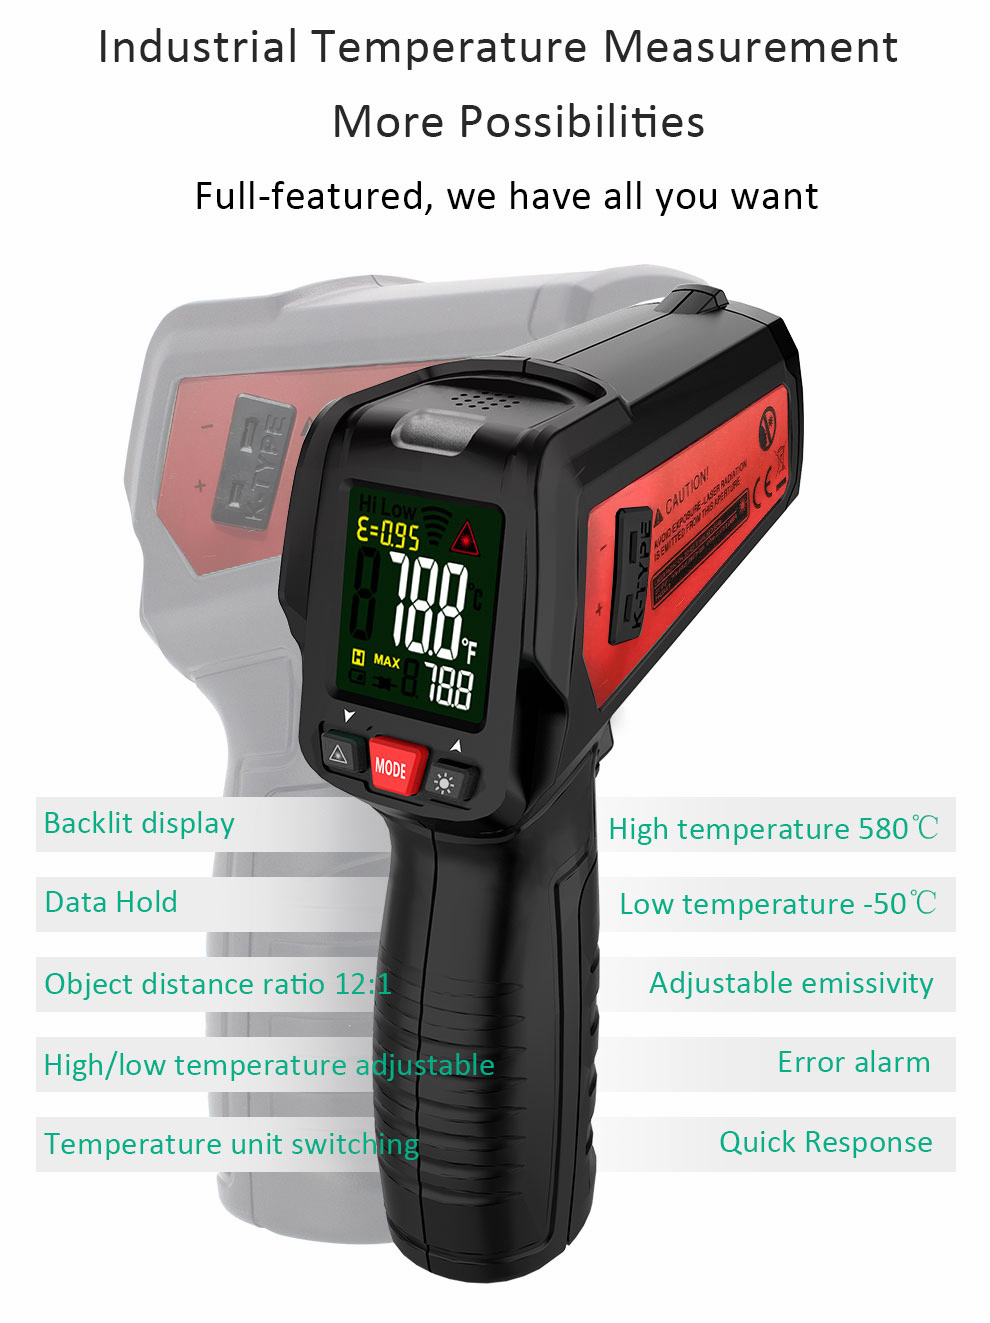 BTM11 Infrared Thermometer